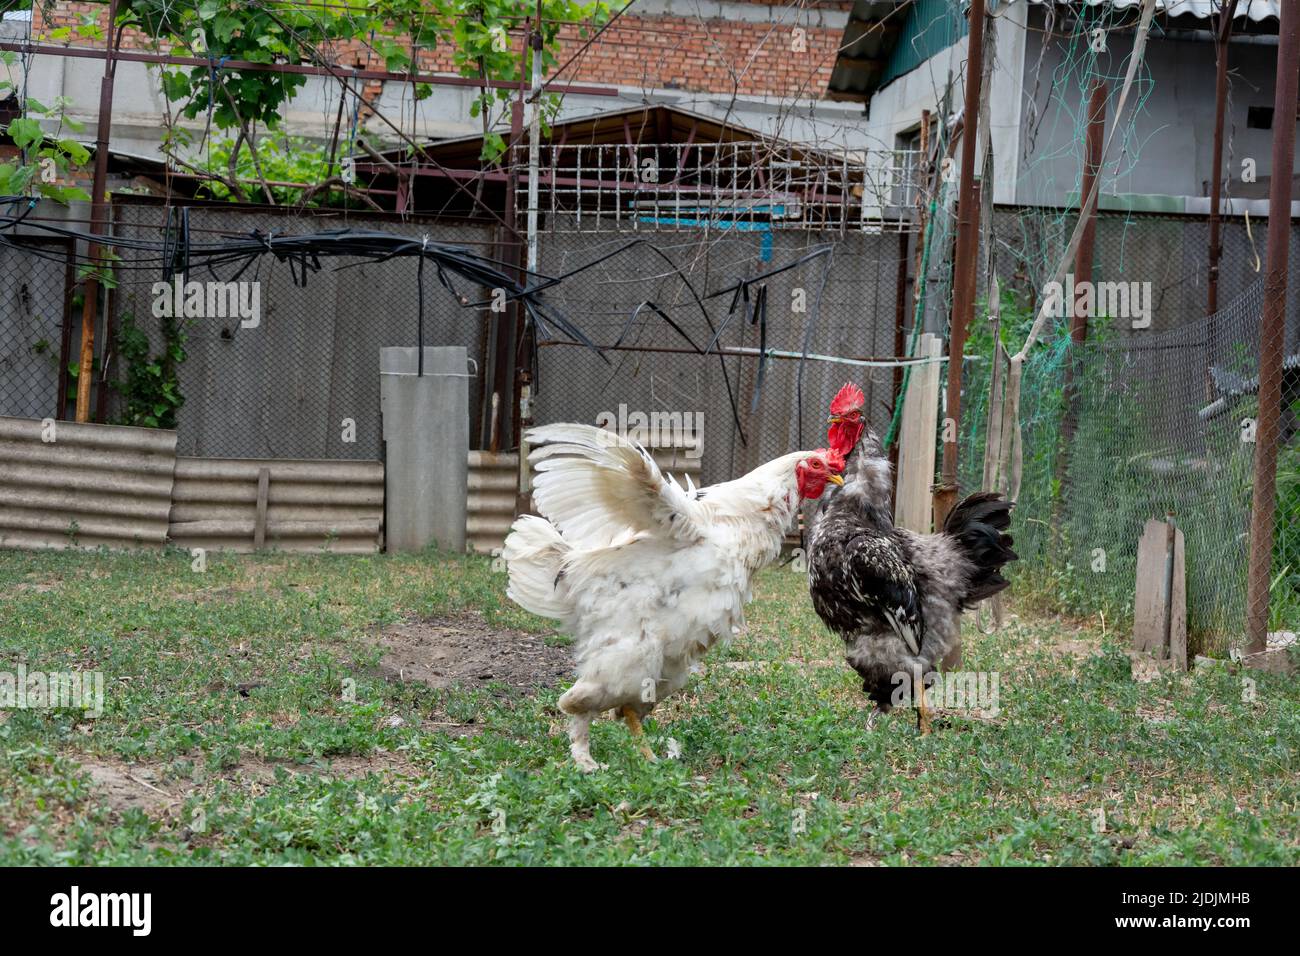 Rooster and young rooster free range. Selective focus on black and white rooster. A young white rooster spread its wings in front of an adult black an Stock Photo